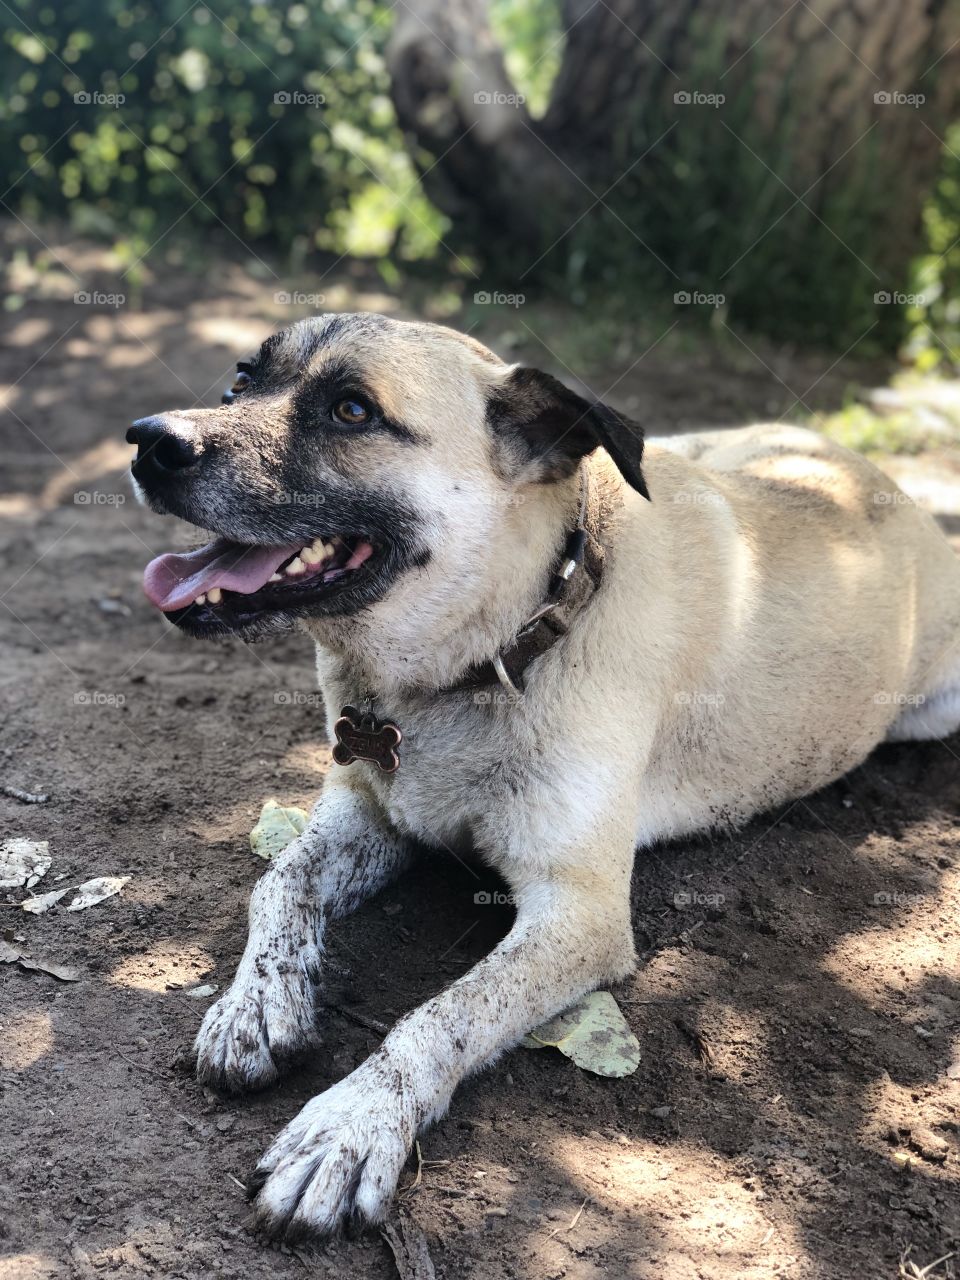 Rescue mutt goes swimming for the first time and comes back with some very muddy paws! 